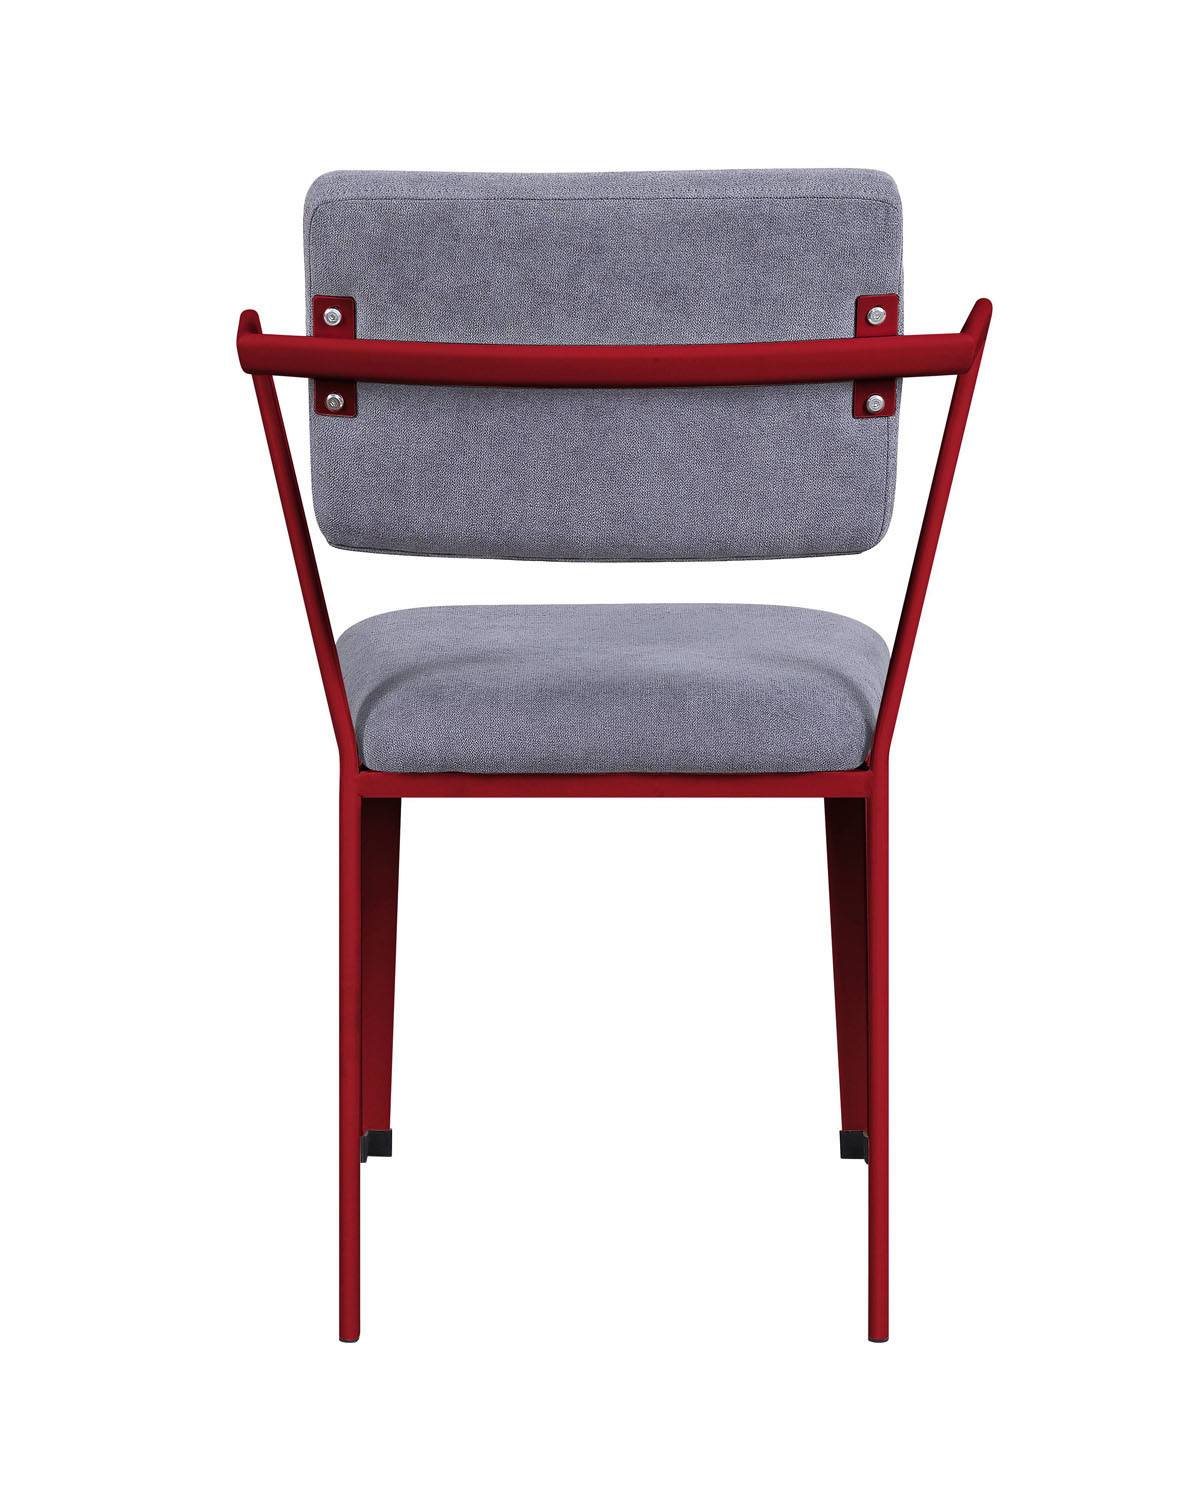 Konto Industrial Arm Chair - Red